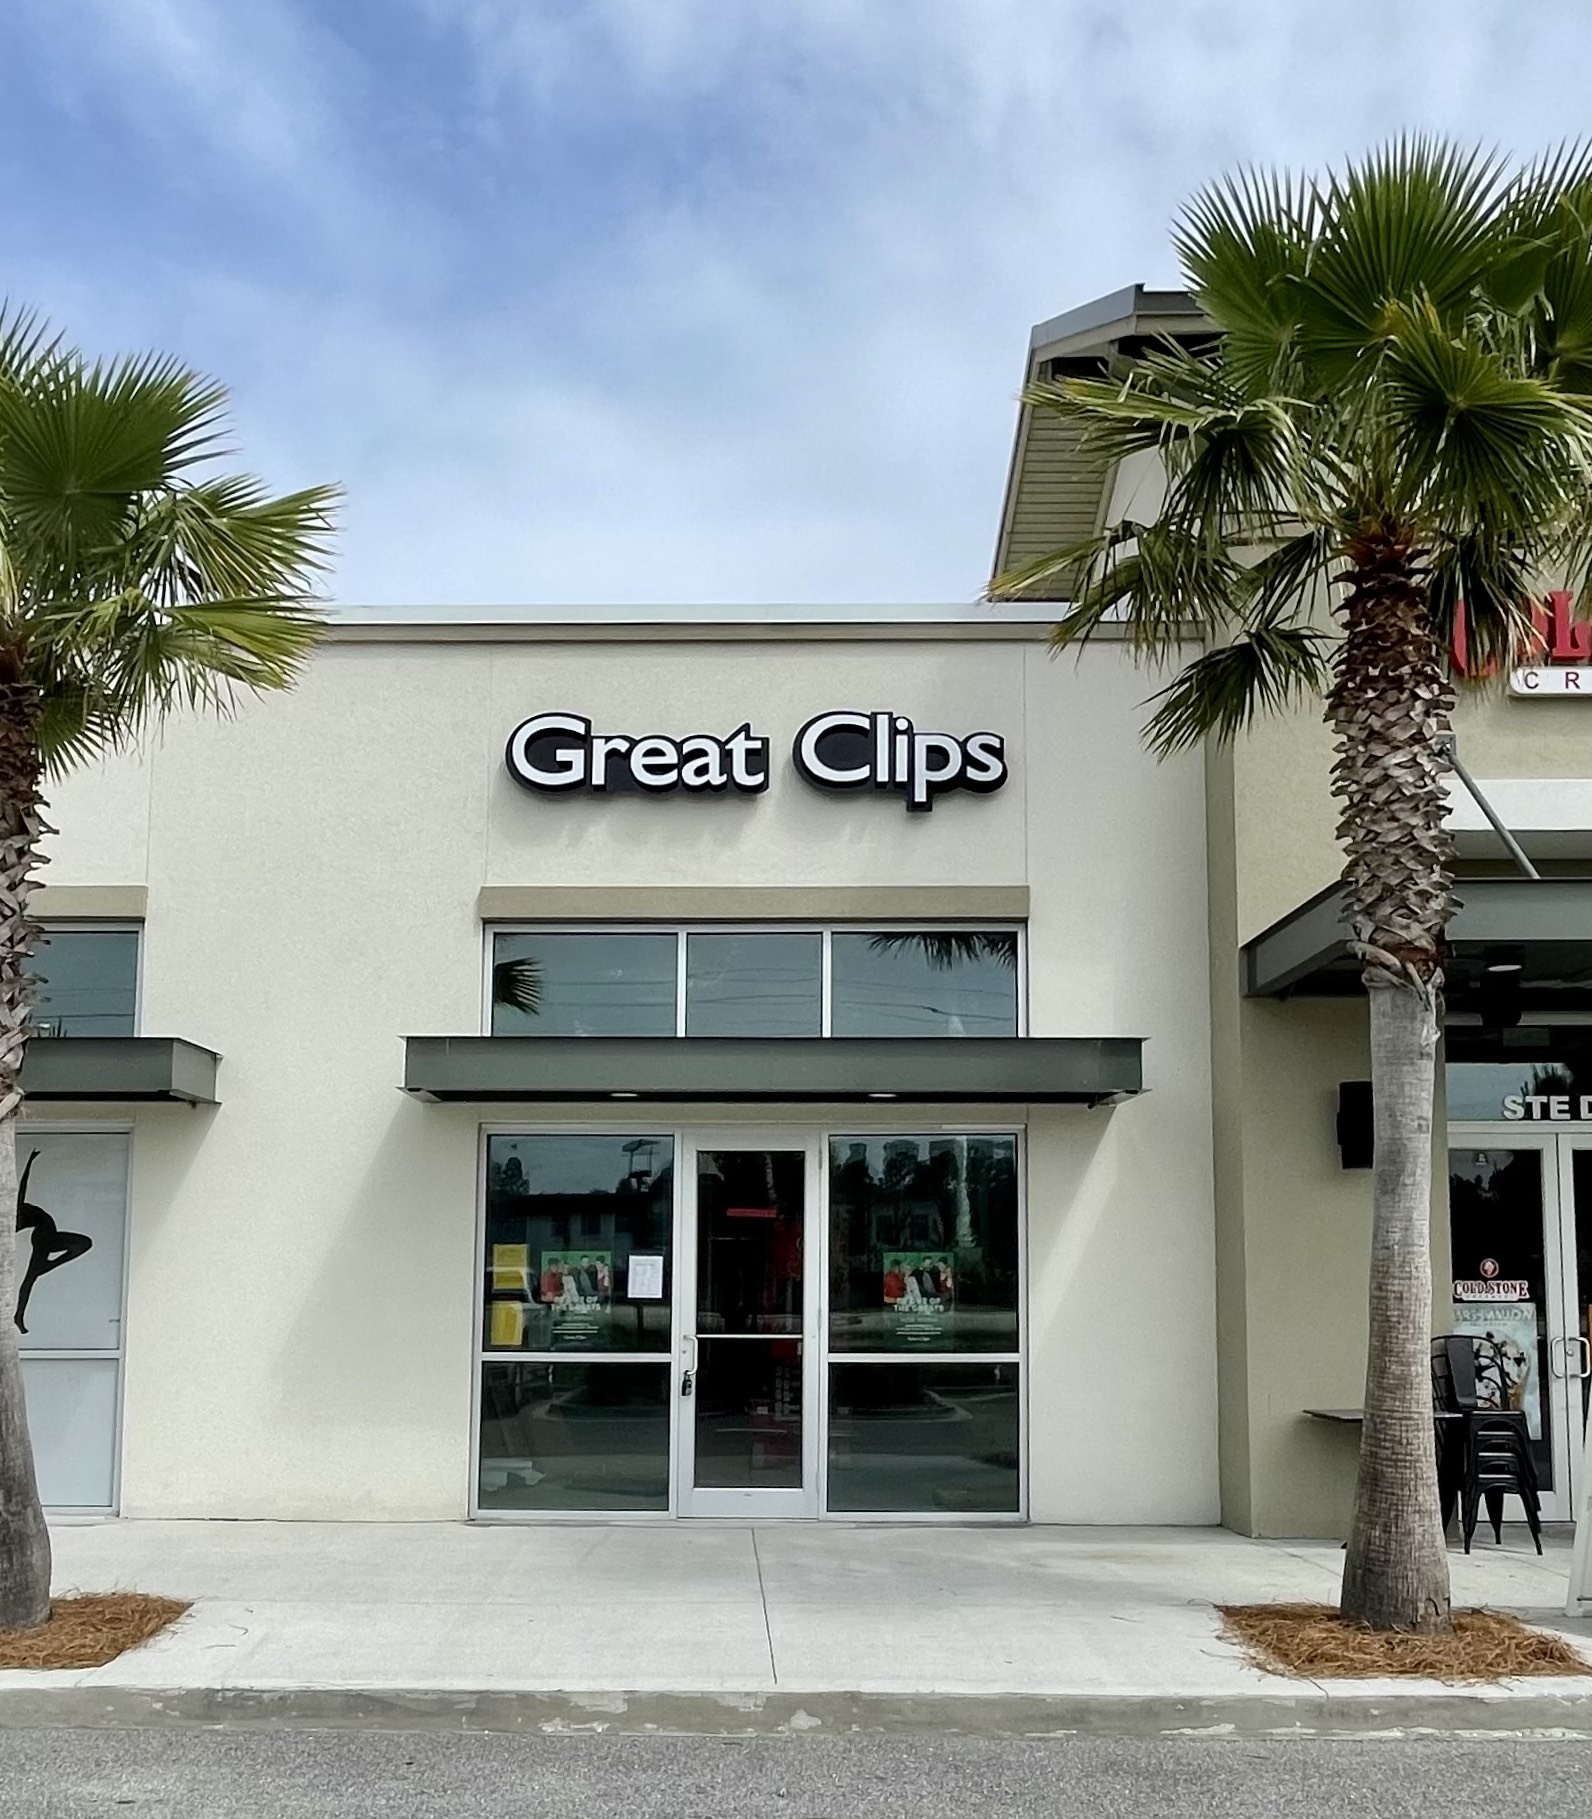 Great clips storefront in Wildlight